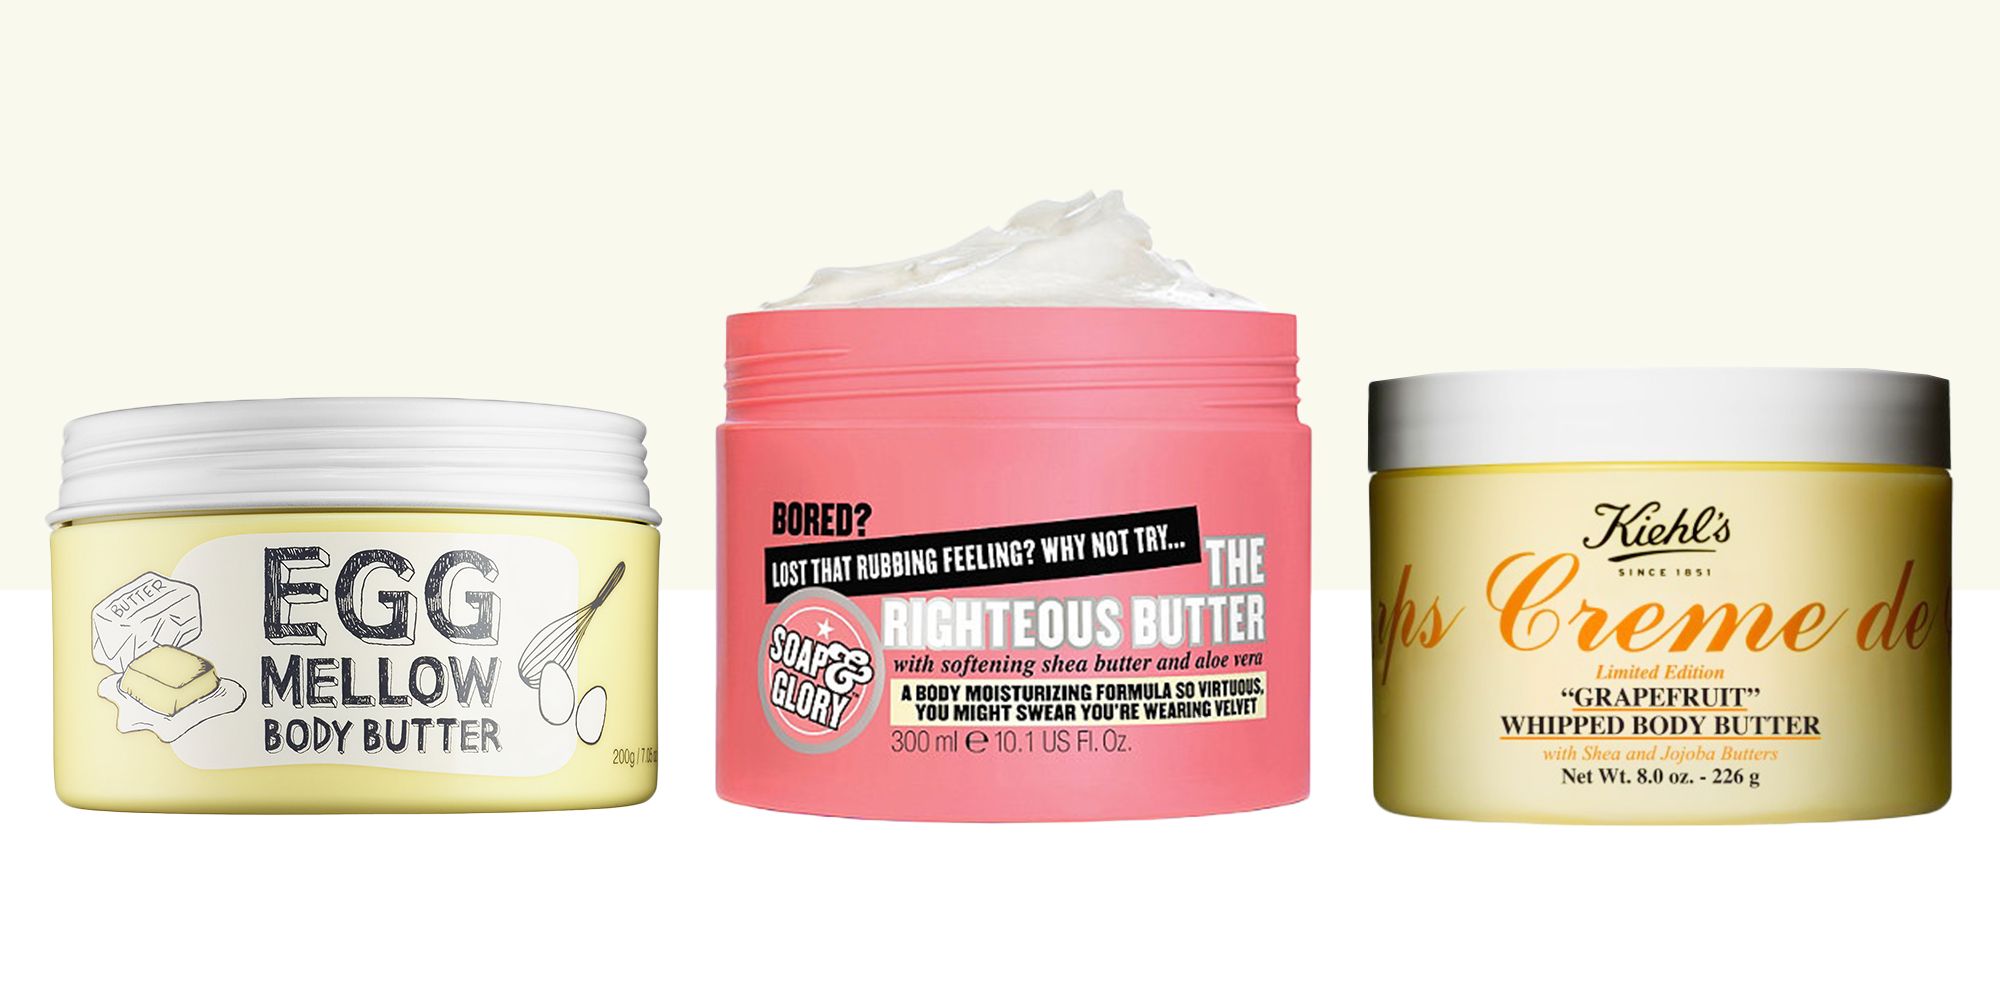 Floreren Rand Rationalisatie 11 Best Body Butters in 2018 - Hydrating Body Butters for Soft Skin